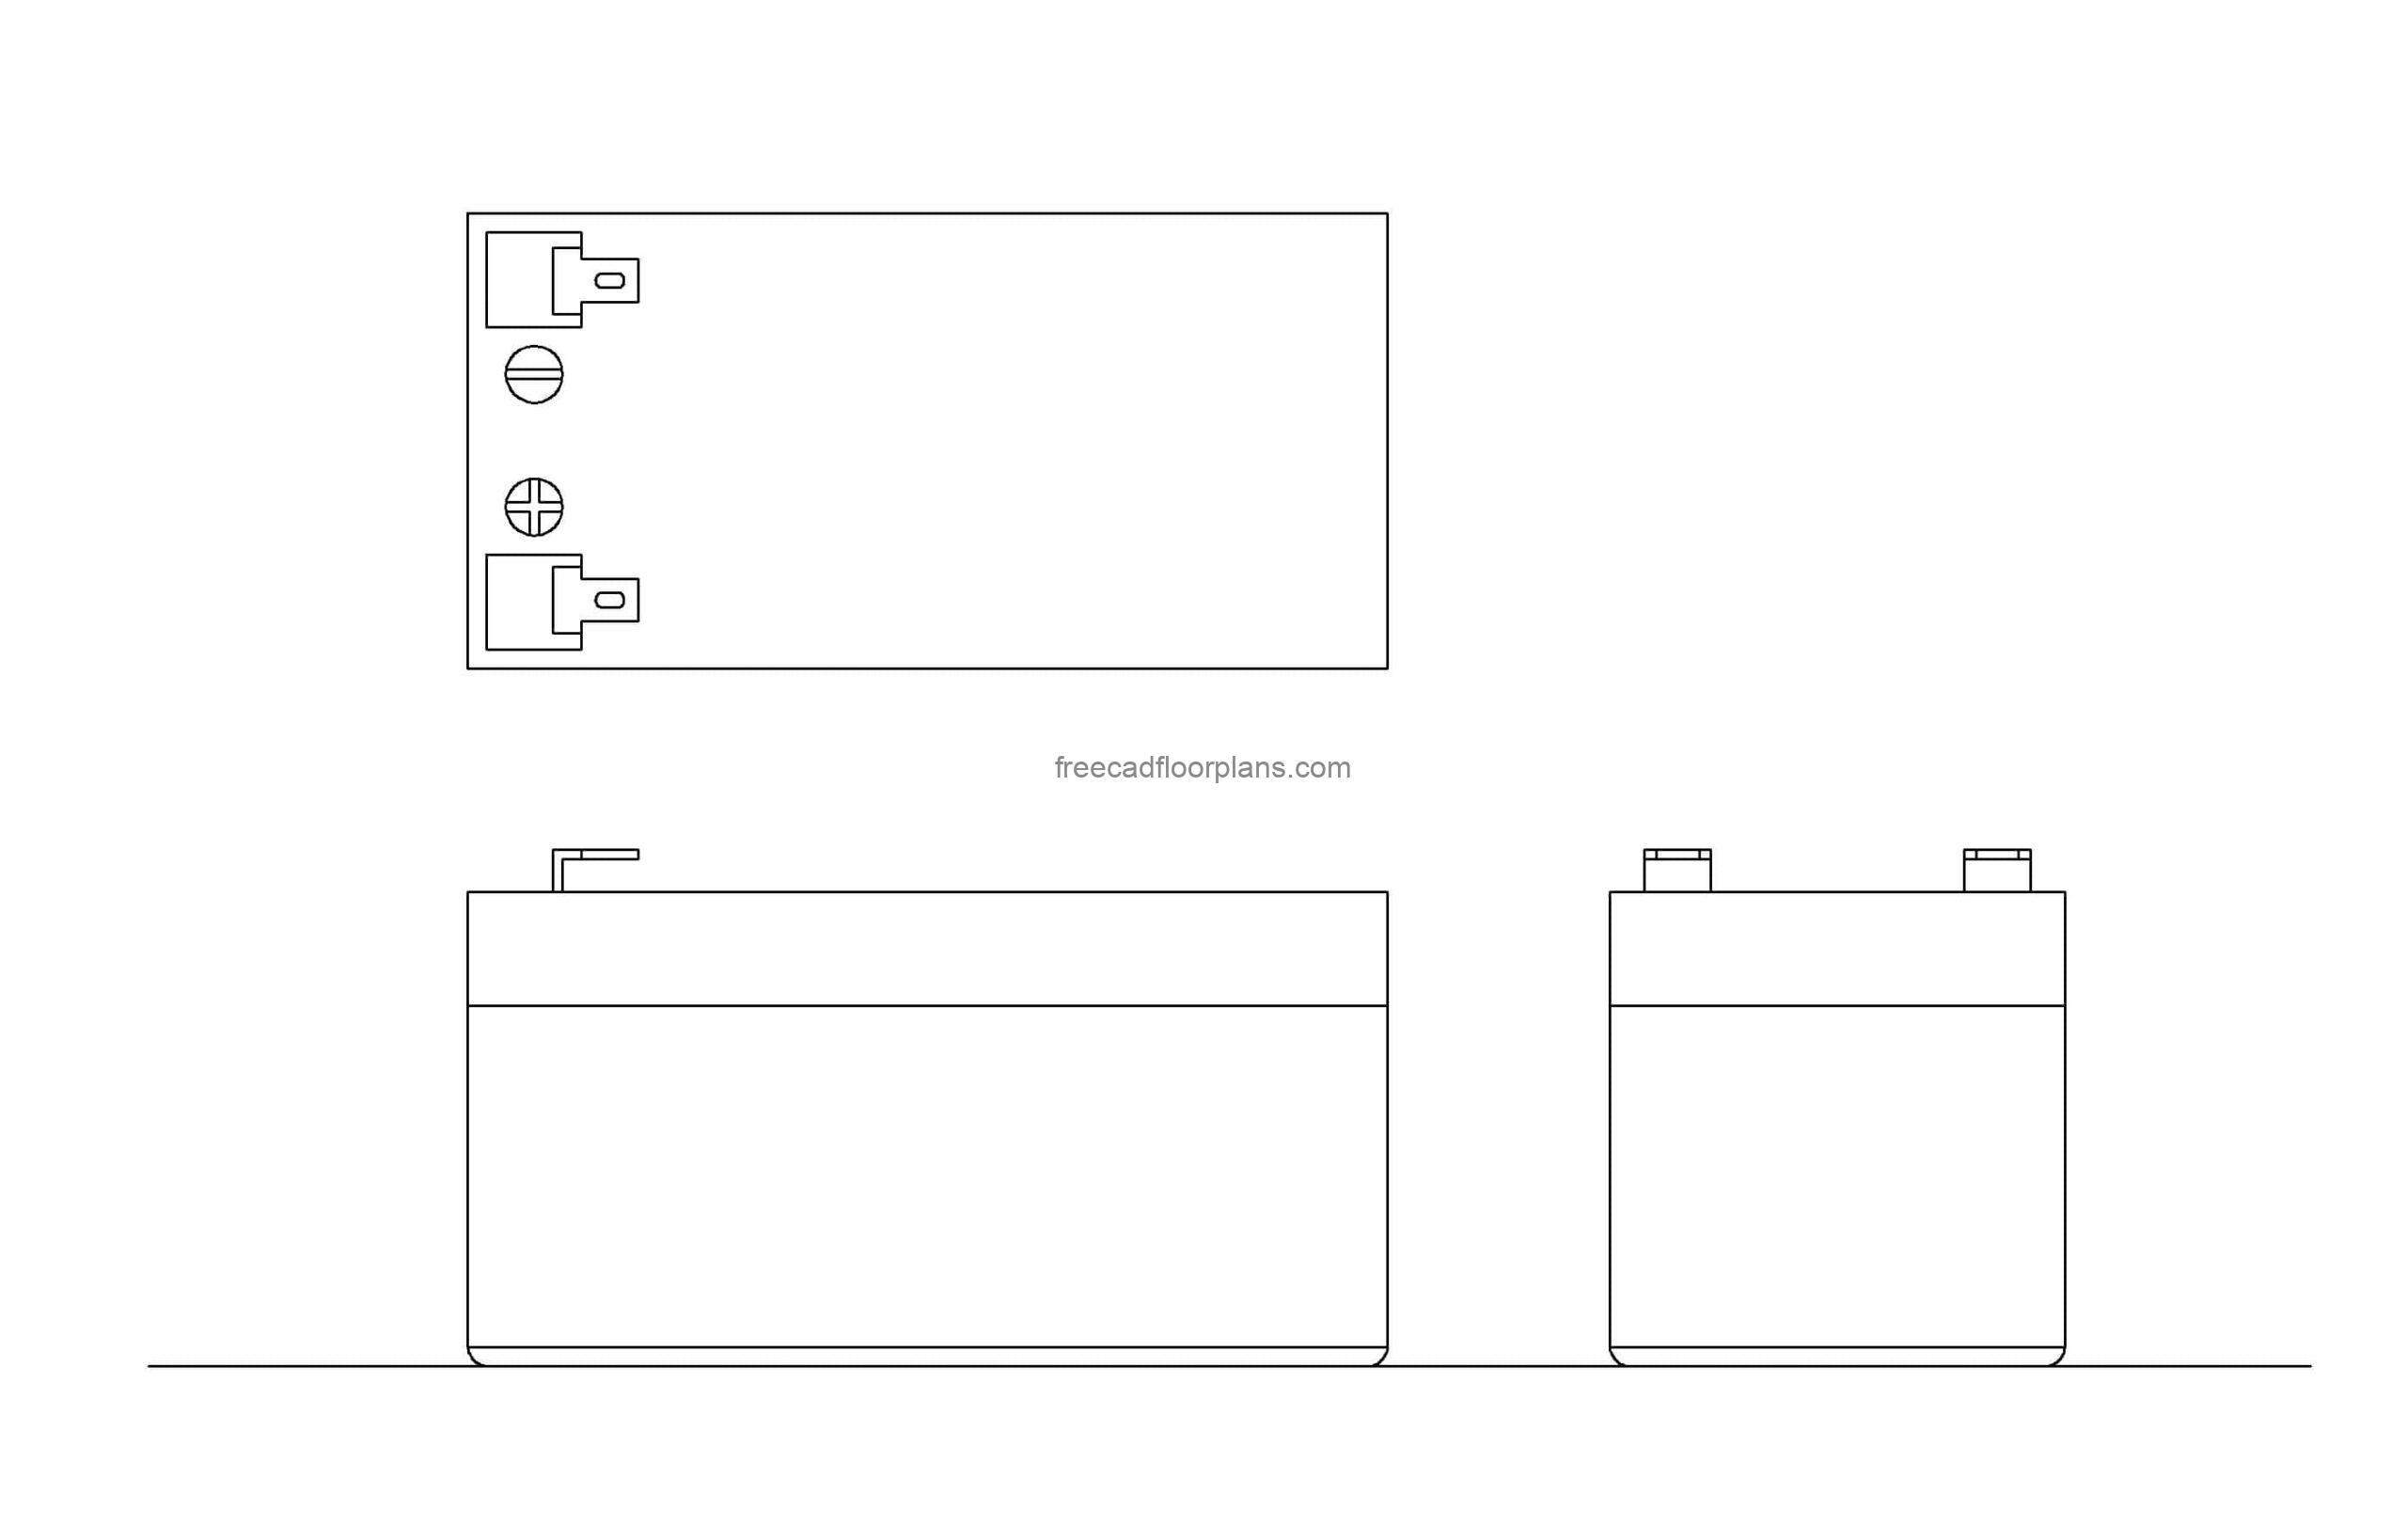 12v battery autocad block drawing, all 2d views, plan and elevation, dwg file for free download